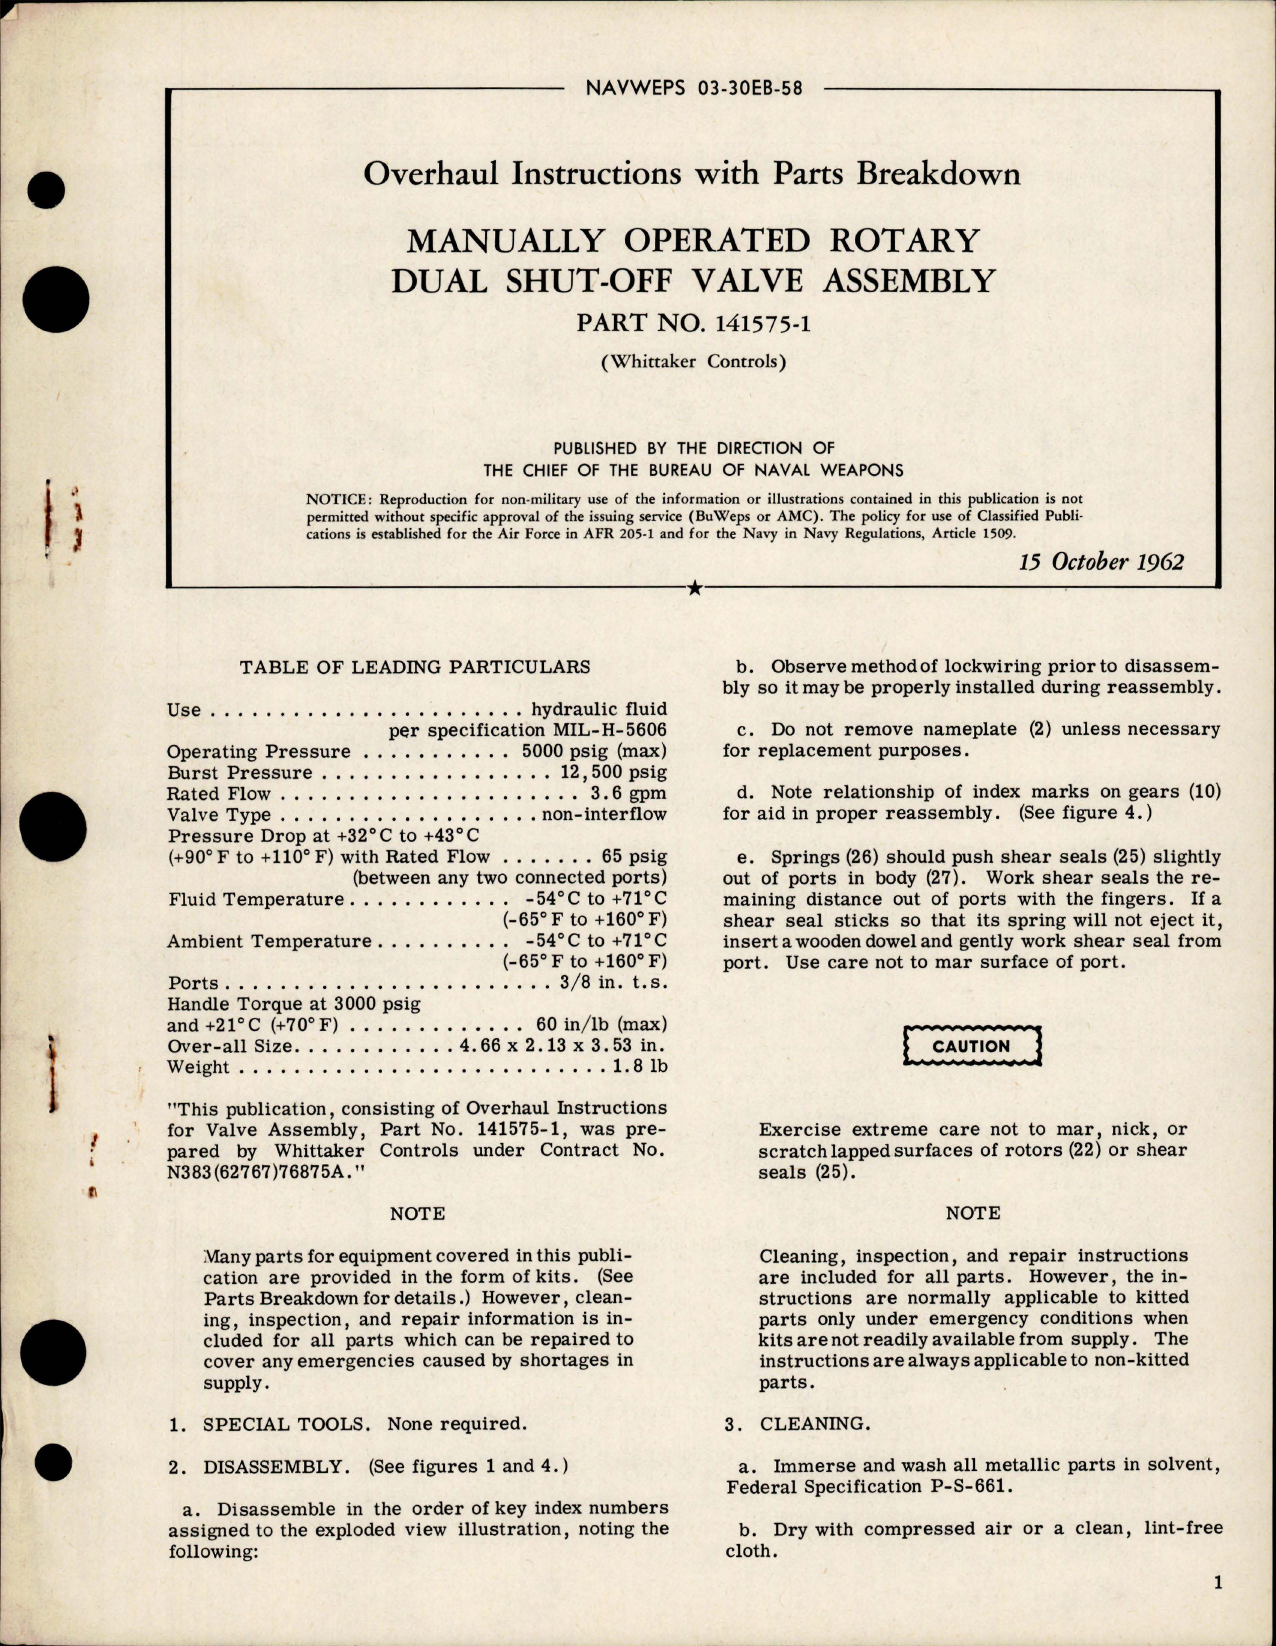 Sample page 1 from AirCorps Library document: Overhaul Instructions with Parts for Manually Operated Rotary Dual Shut Off Valve Assembly - Part 141575-1 